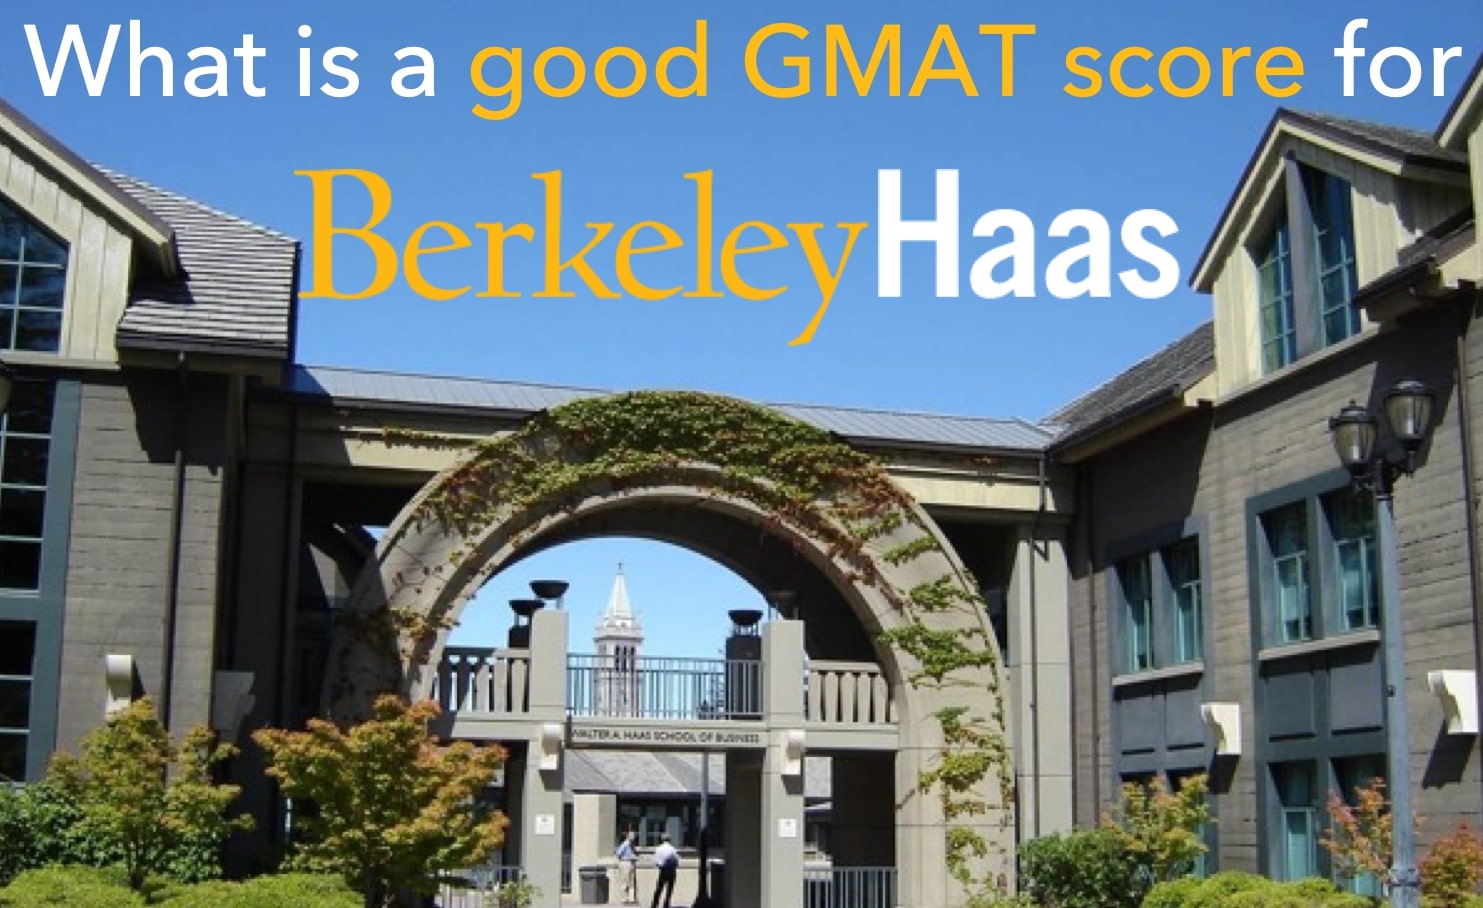 What is a good GMAT score for UC Berkeley Haas School of Business?